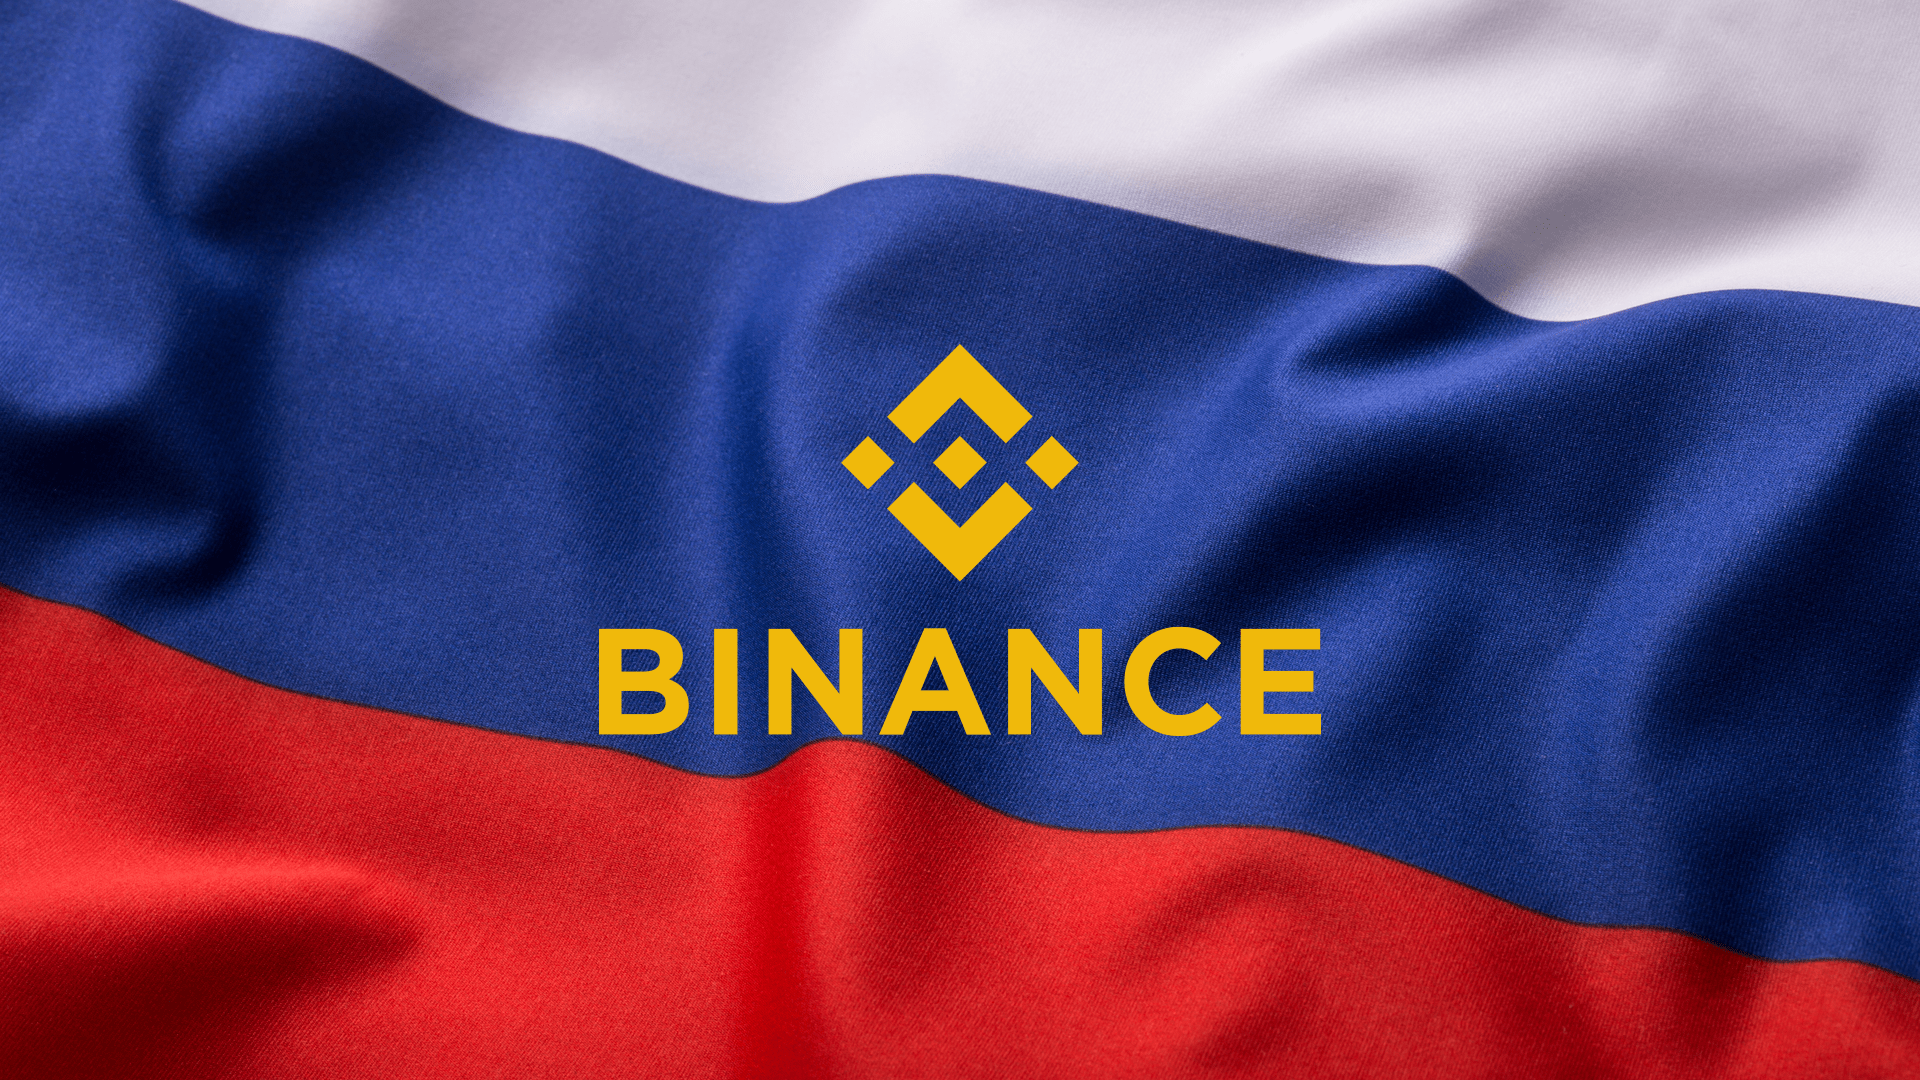 Binance Probed for Sanctions Breach